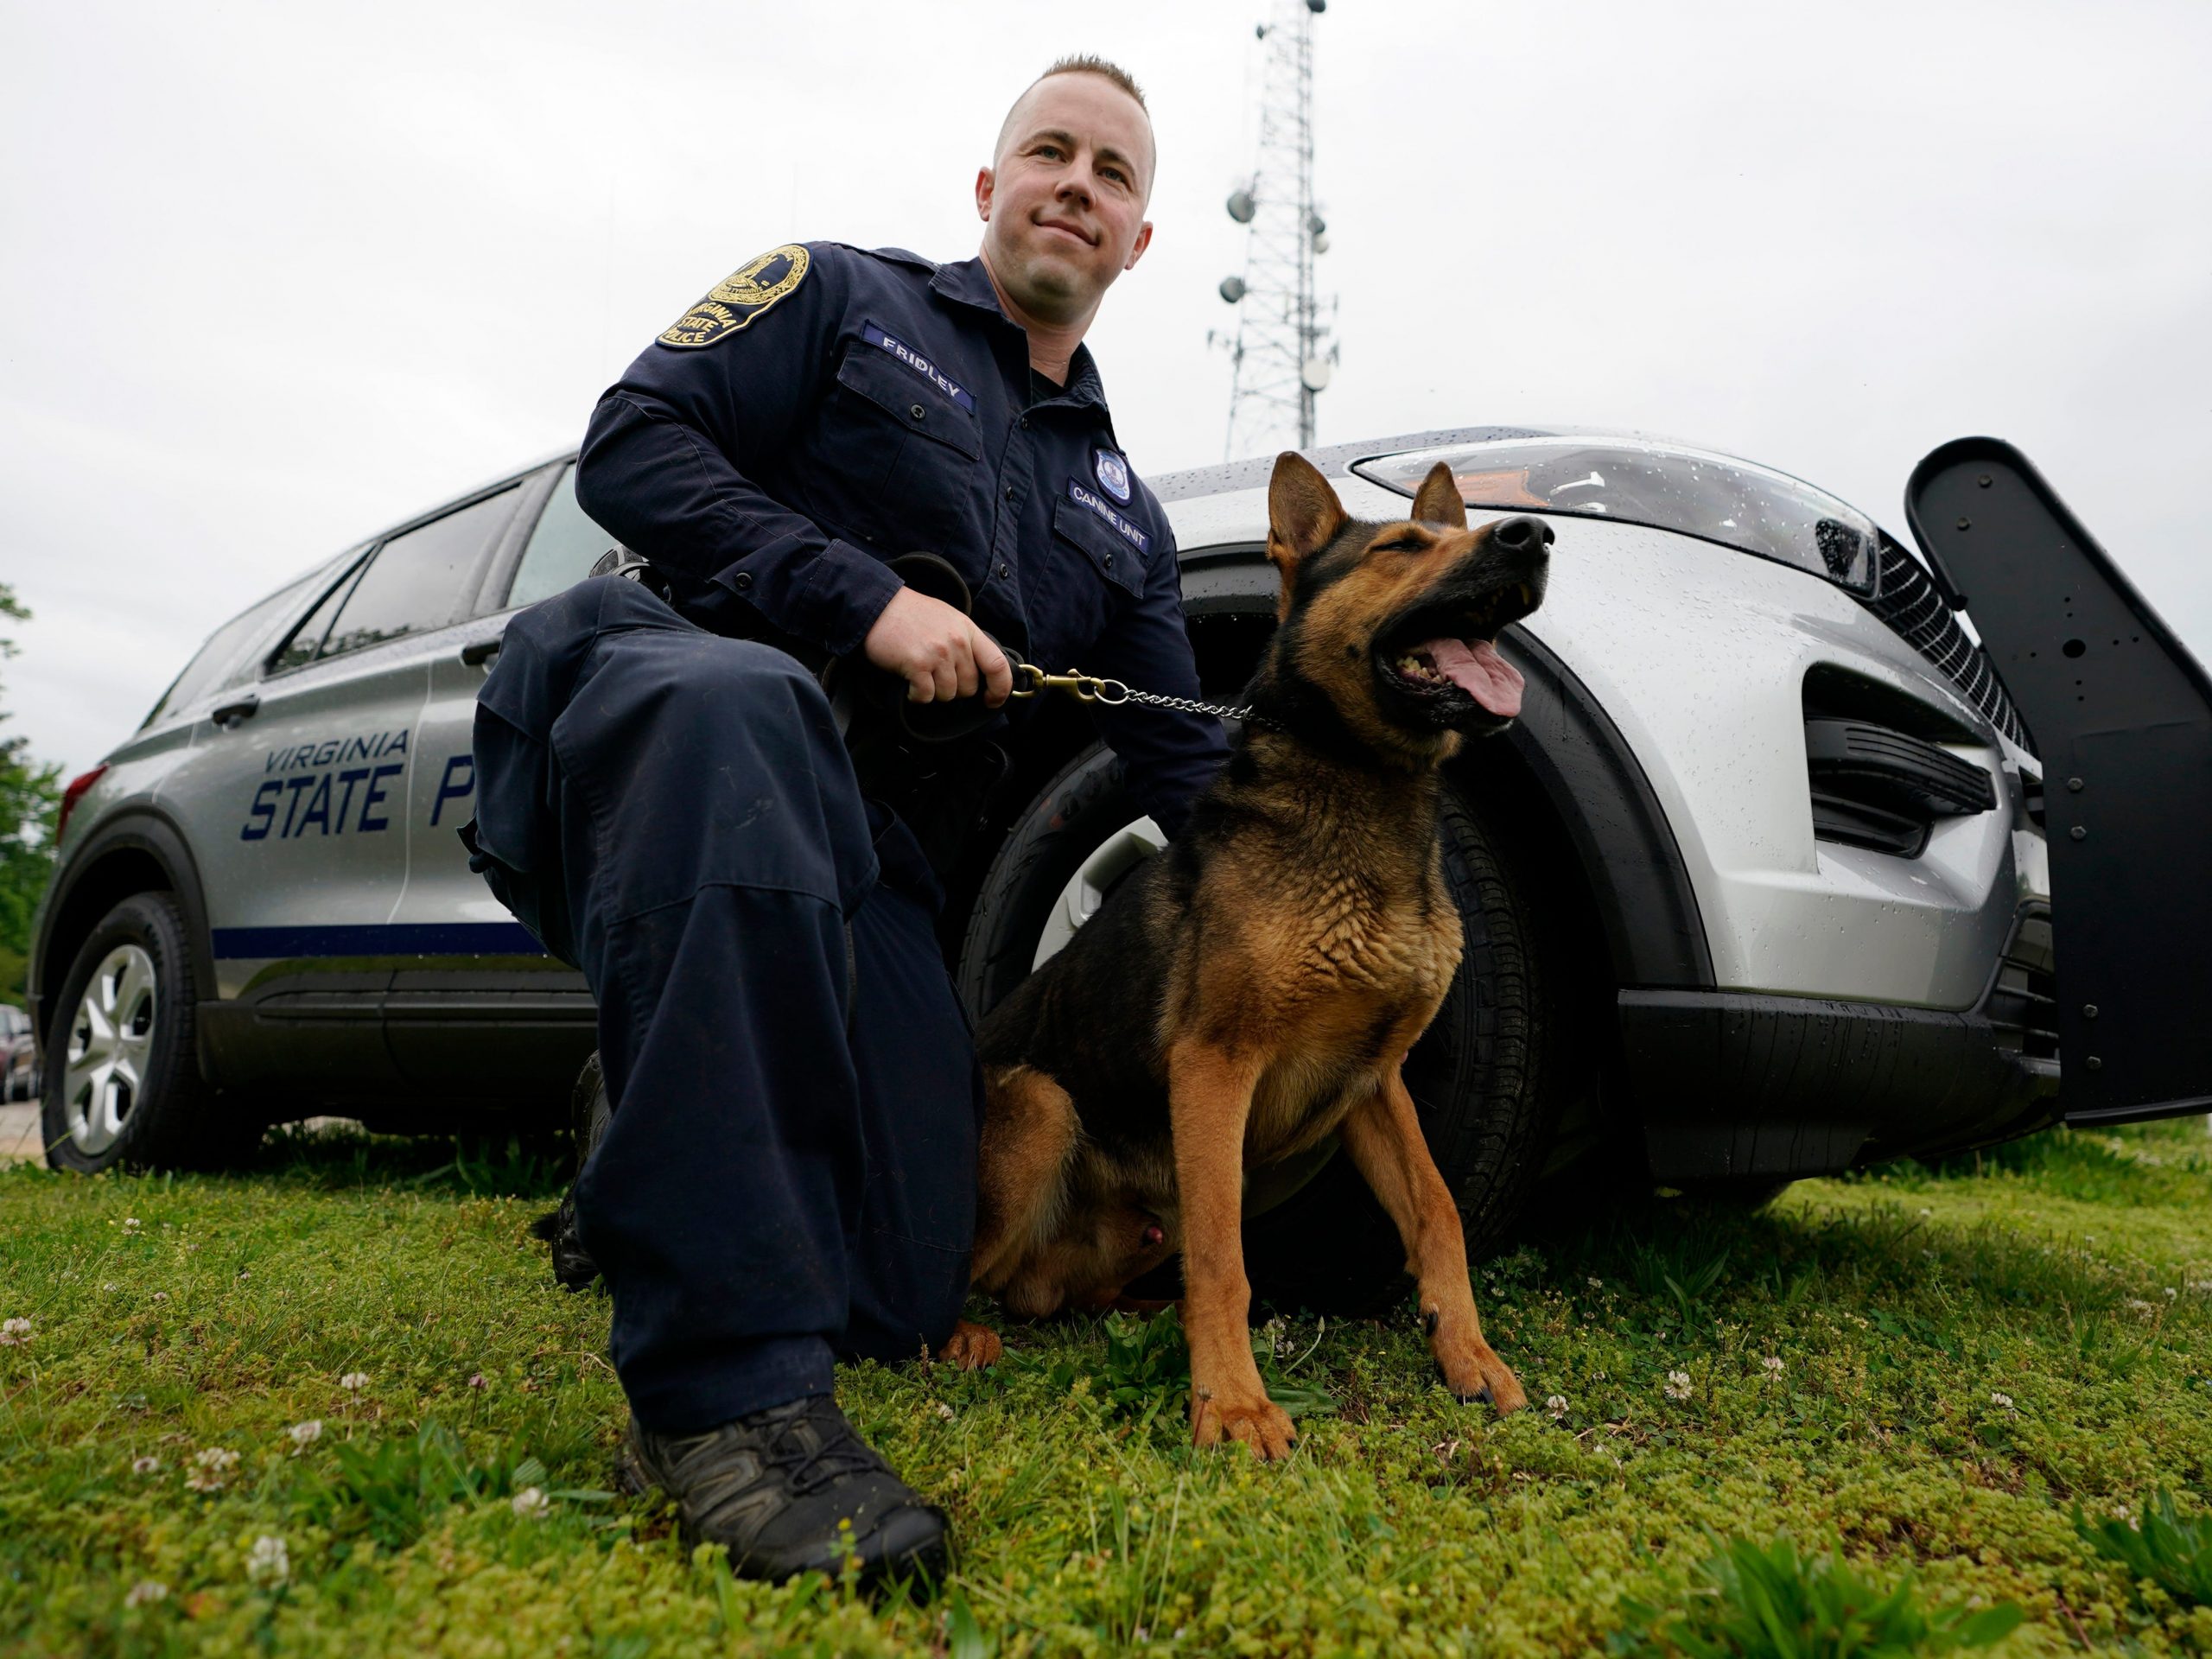 A police officer kneels in front of a cruiser and poses with a police dog.